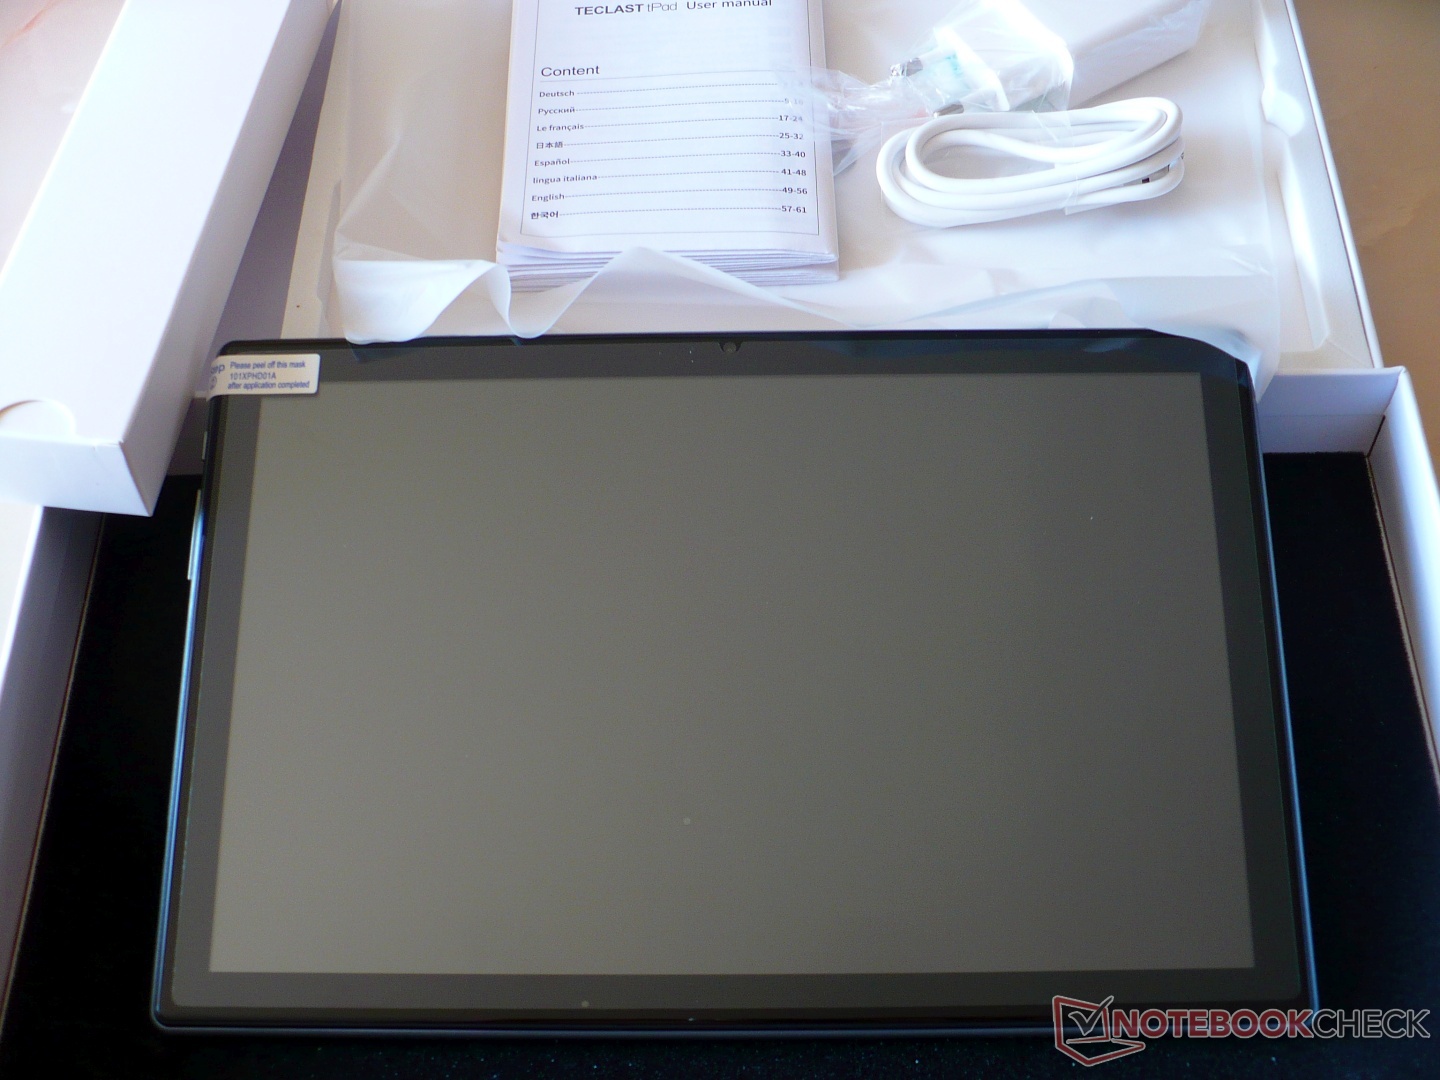 Teclast P20HD review, a good entry-level Android tablet - GizChina.it